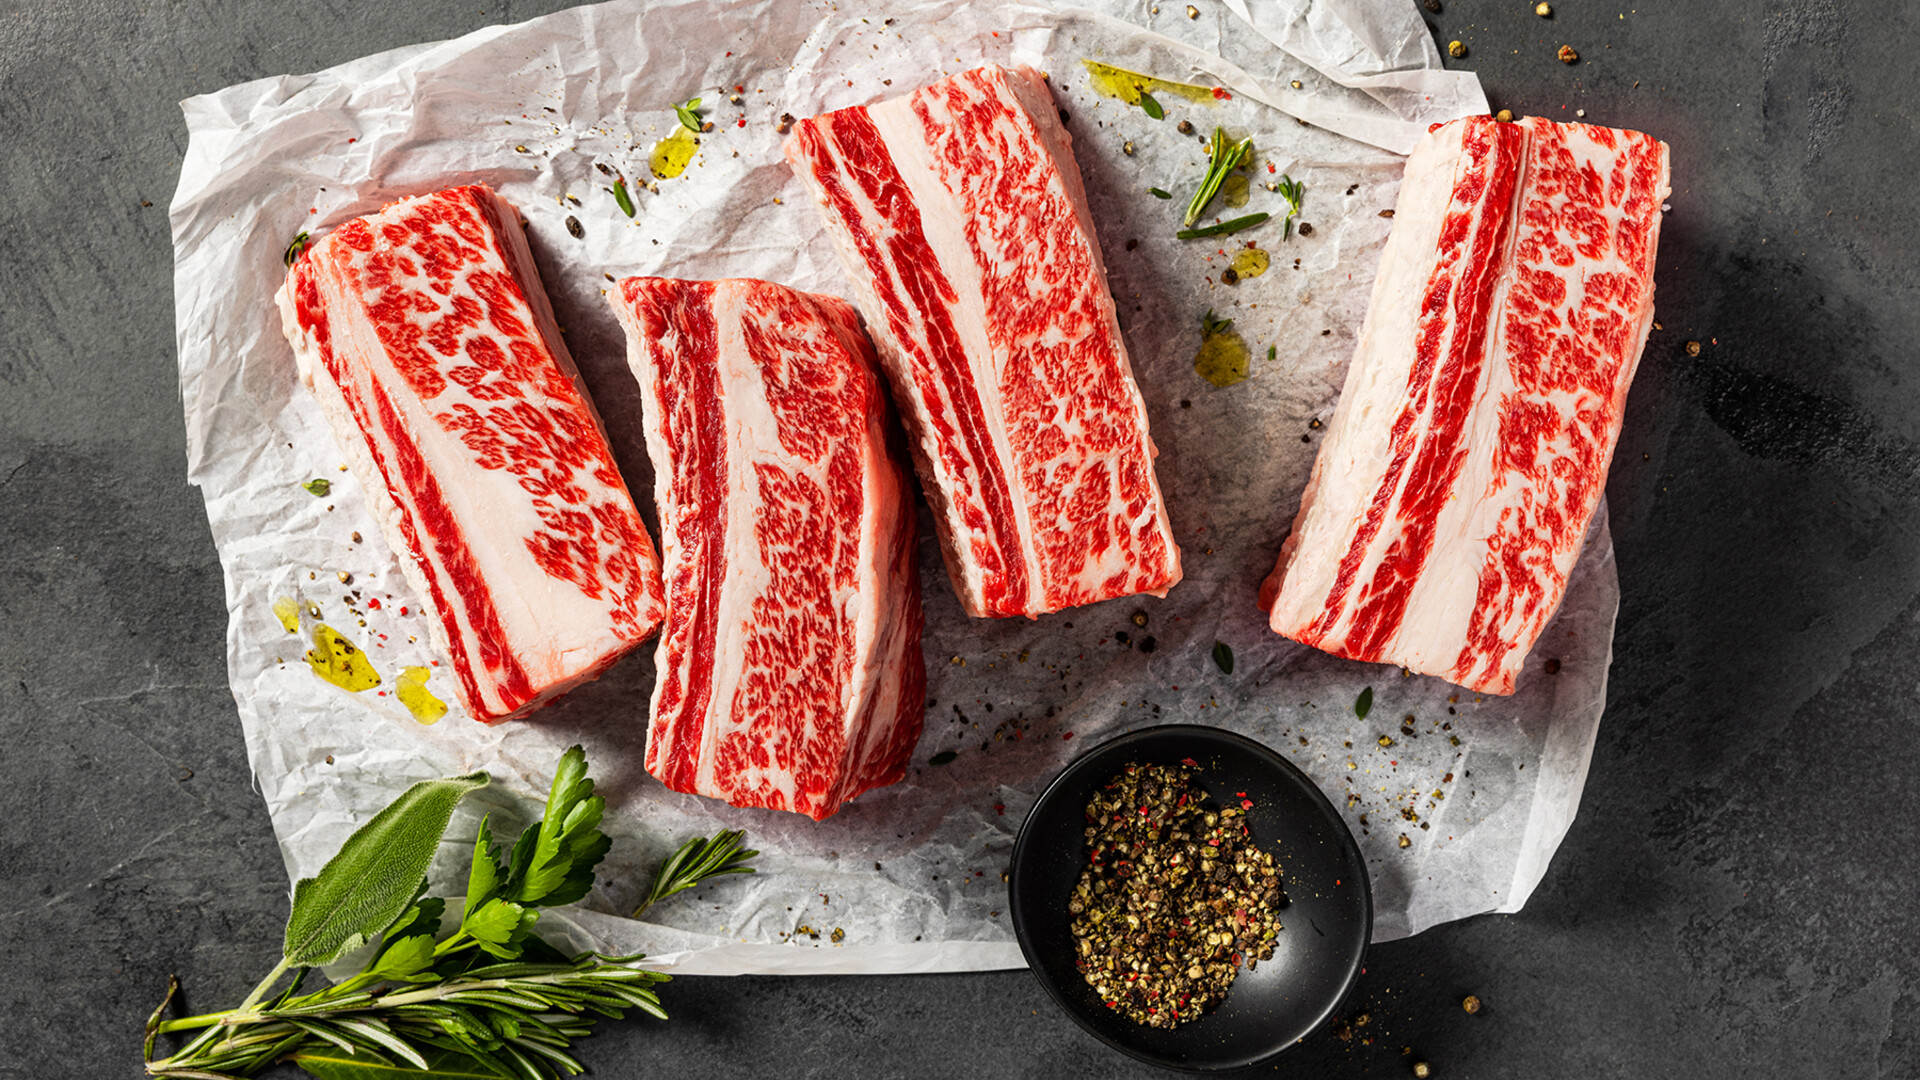 Certified Angus Beef Expands Offering with Grass-Fed Beef